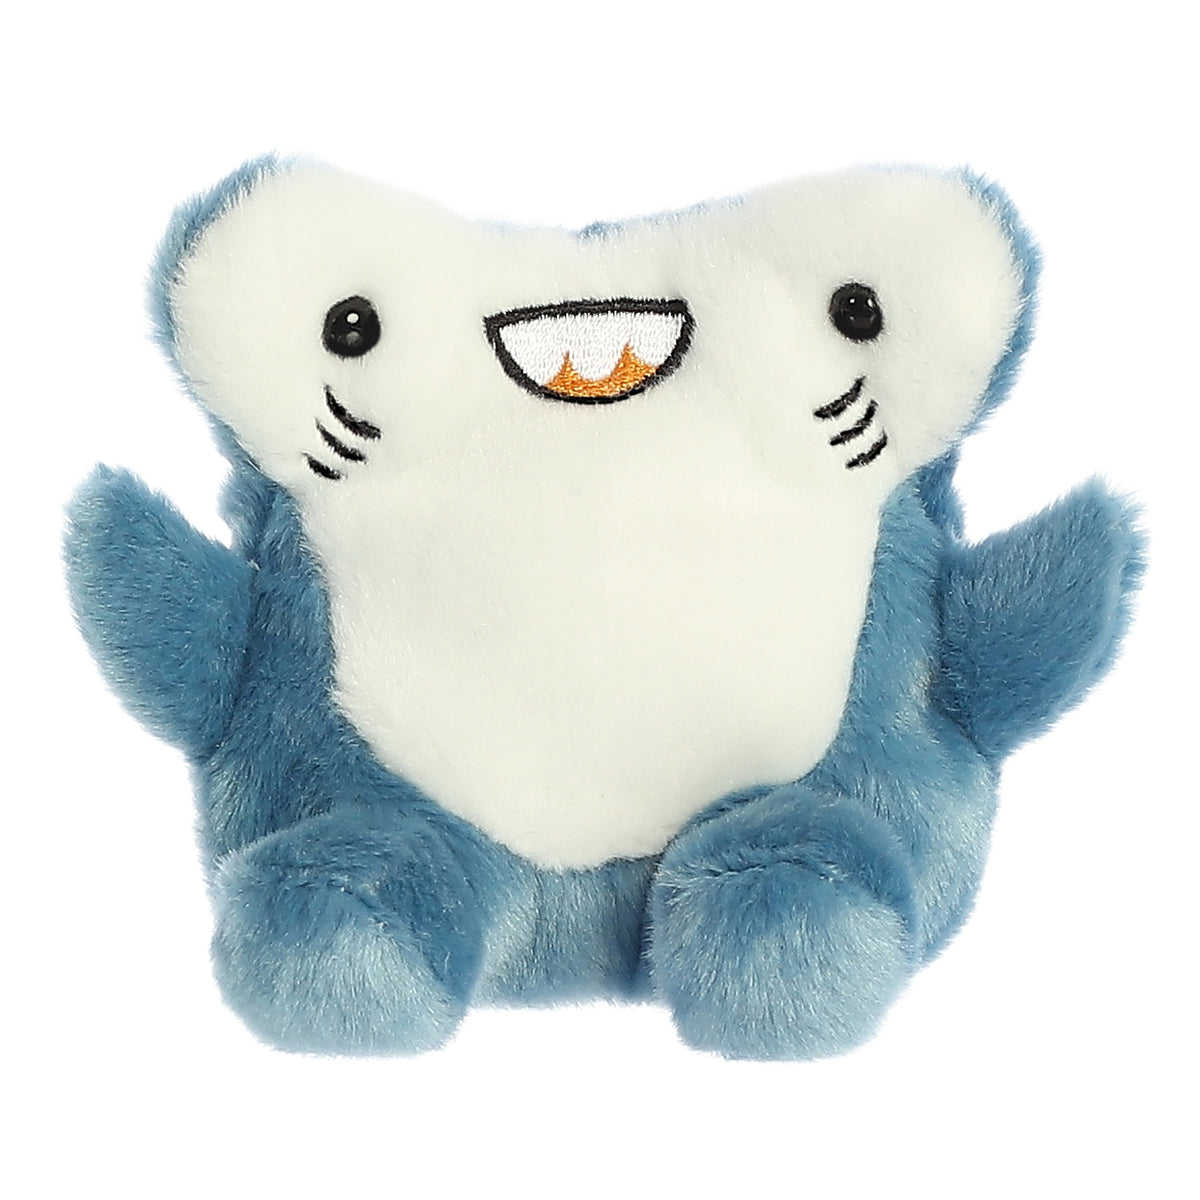 Shark plushie from Palm Pals, showcasing a rich blue tone and intricate details, invitingly plush for playful snuggles.